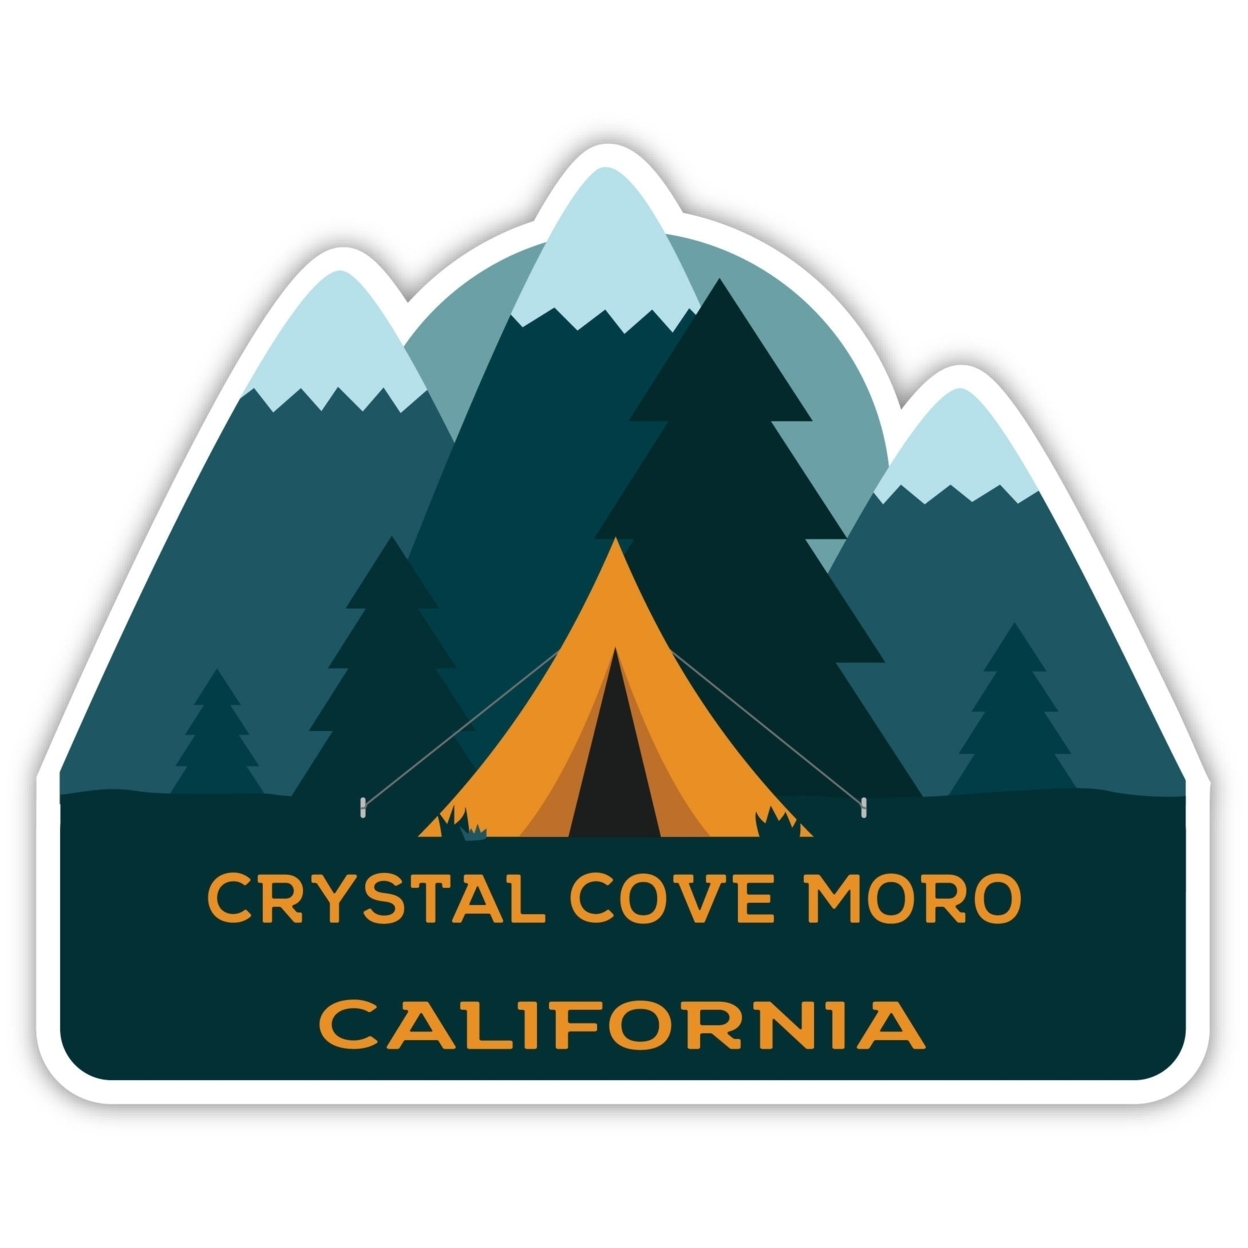 Crystal Cove Moro California Souvenir Decorative Stickers (Choose Theme And Size) - 4-Pack, 10-Inch, Bear